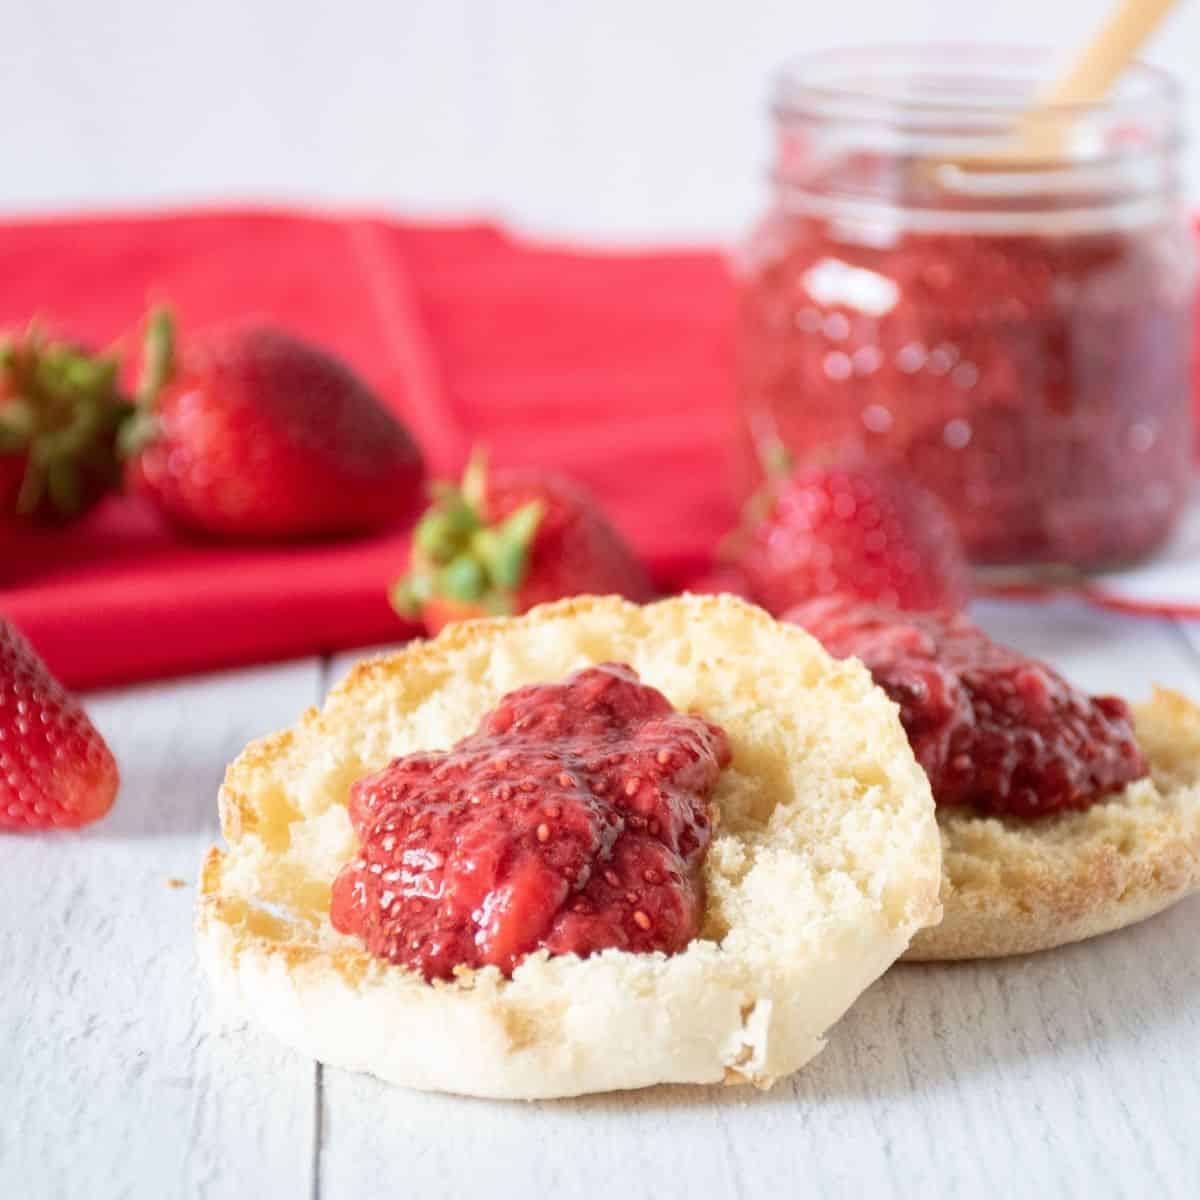 Toasted English Muffin with strawberry jam on it.